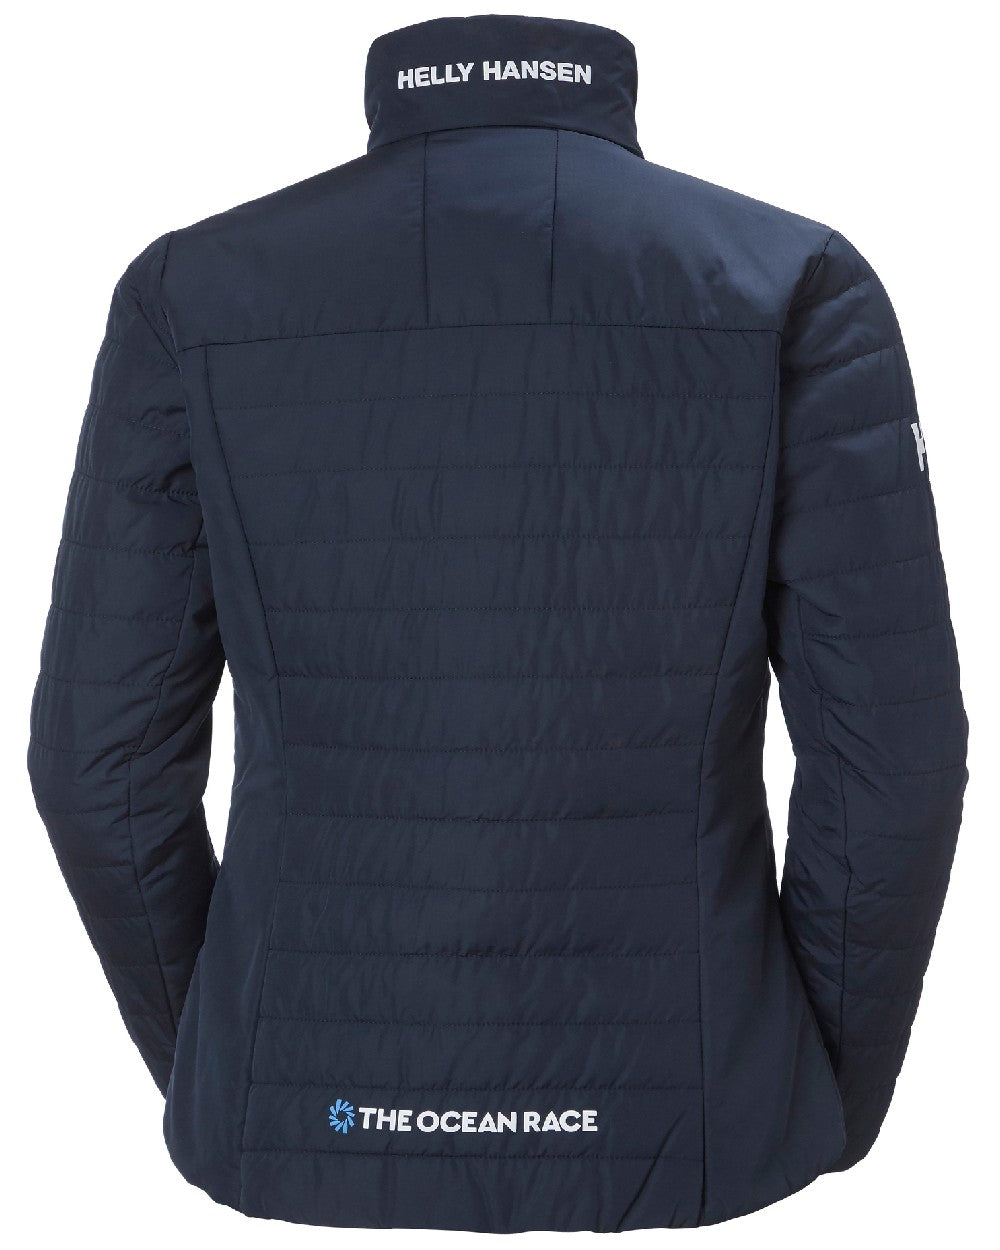 Navy coloured Helly Hansen Womens Ocean Race Insulated Jacket on white background 